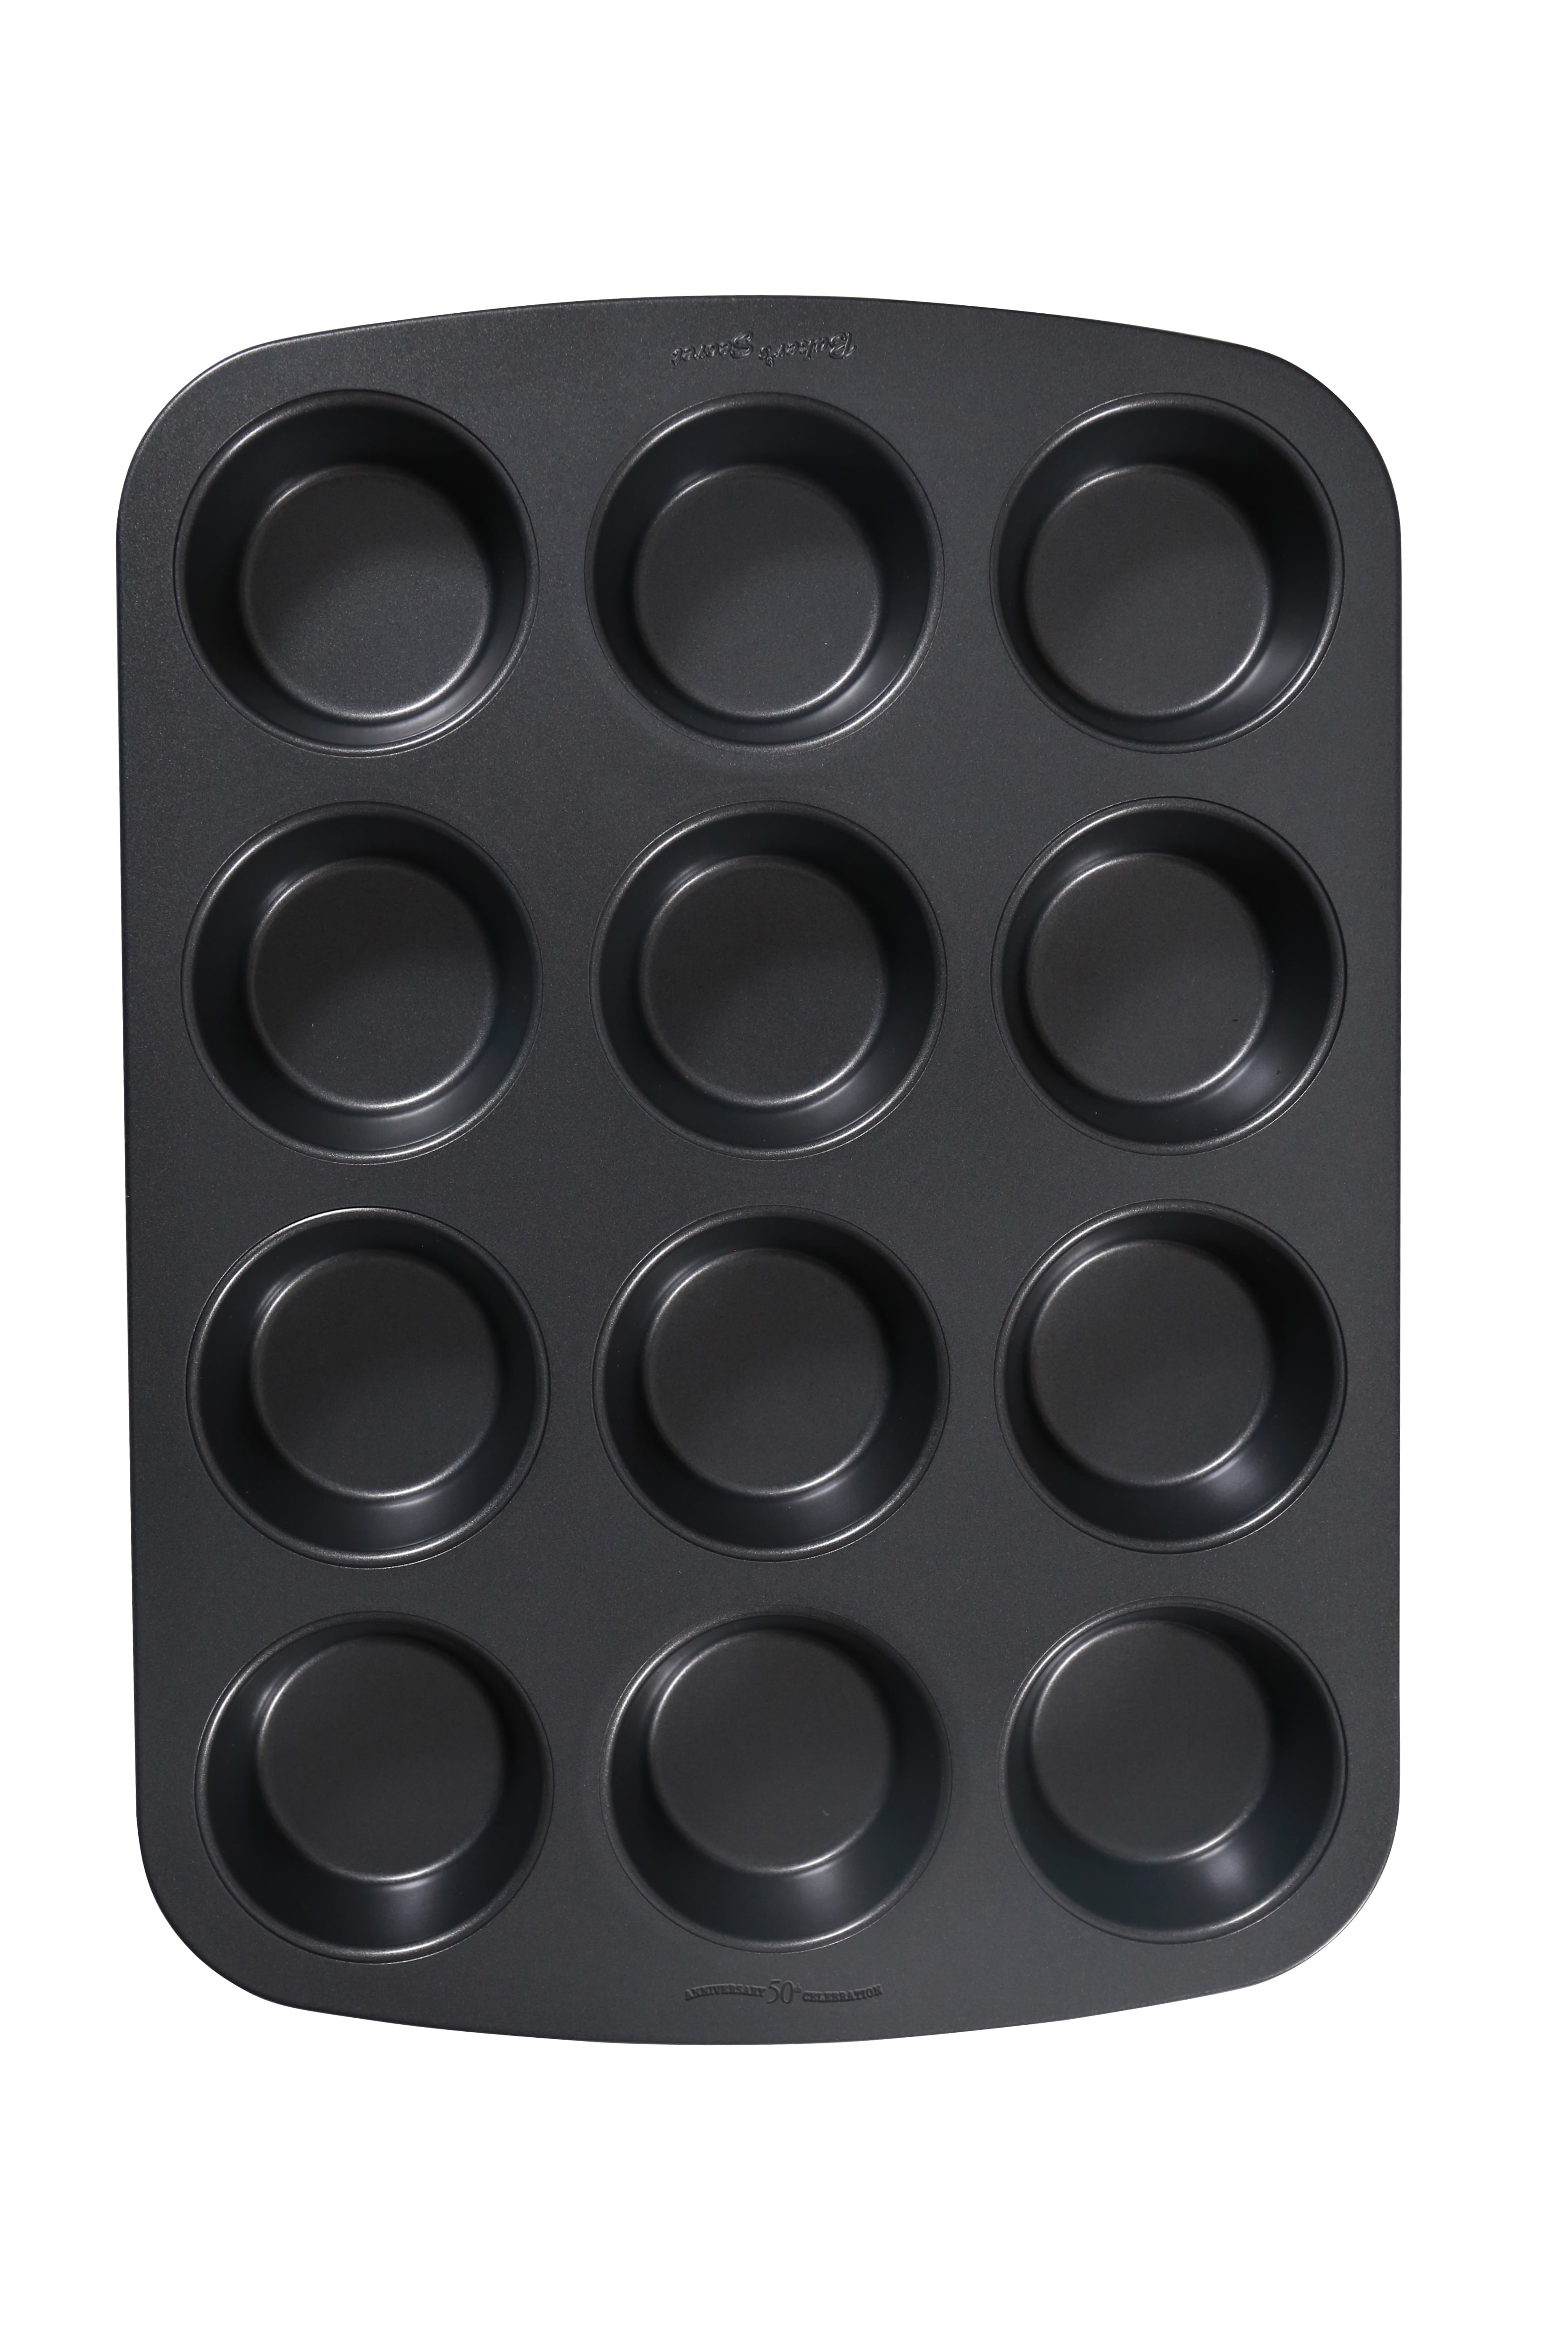 Cuisinart Metal Grip 12-Cup Non-Stick Muffin Pan, Color: Dk Gray